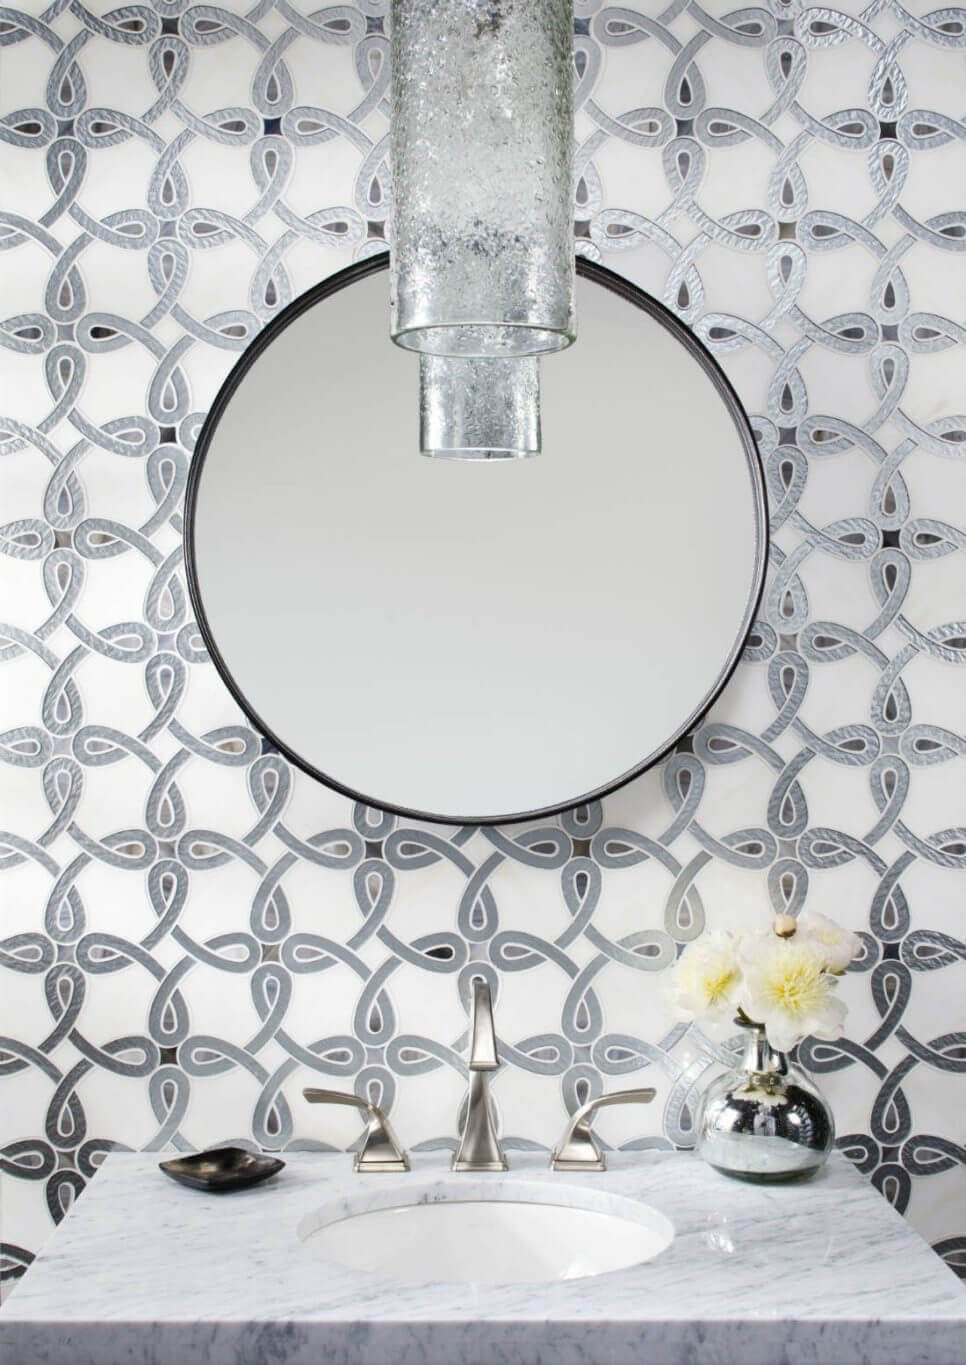 Bathroom with mosaic tile with an interlocking circle design in a metallic finish

